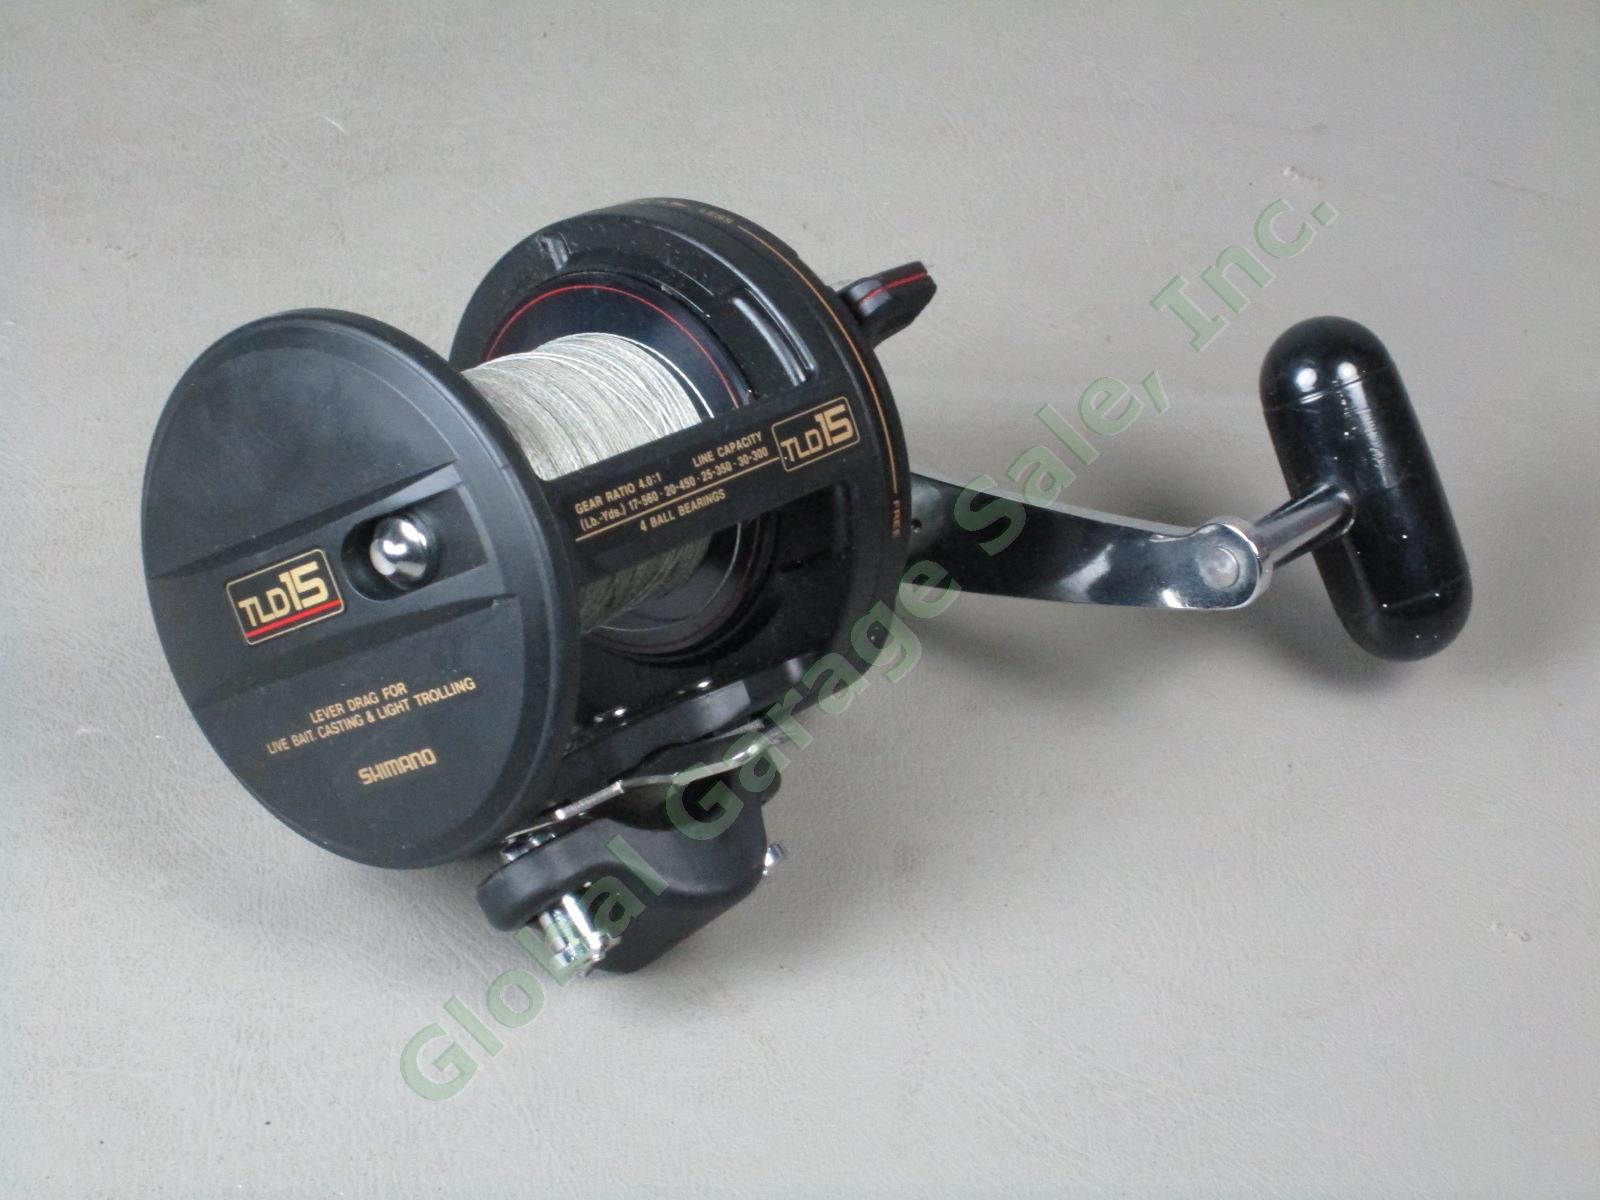 Shimano TLD15 Lever Drag Saltwater Fishing Reel One Piece Graphite Exc+ Cond NR! 4